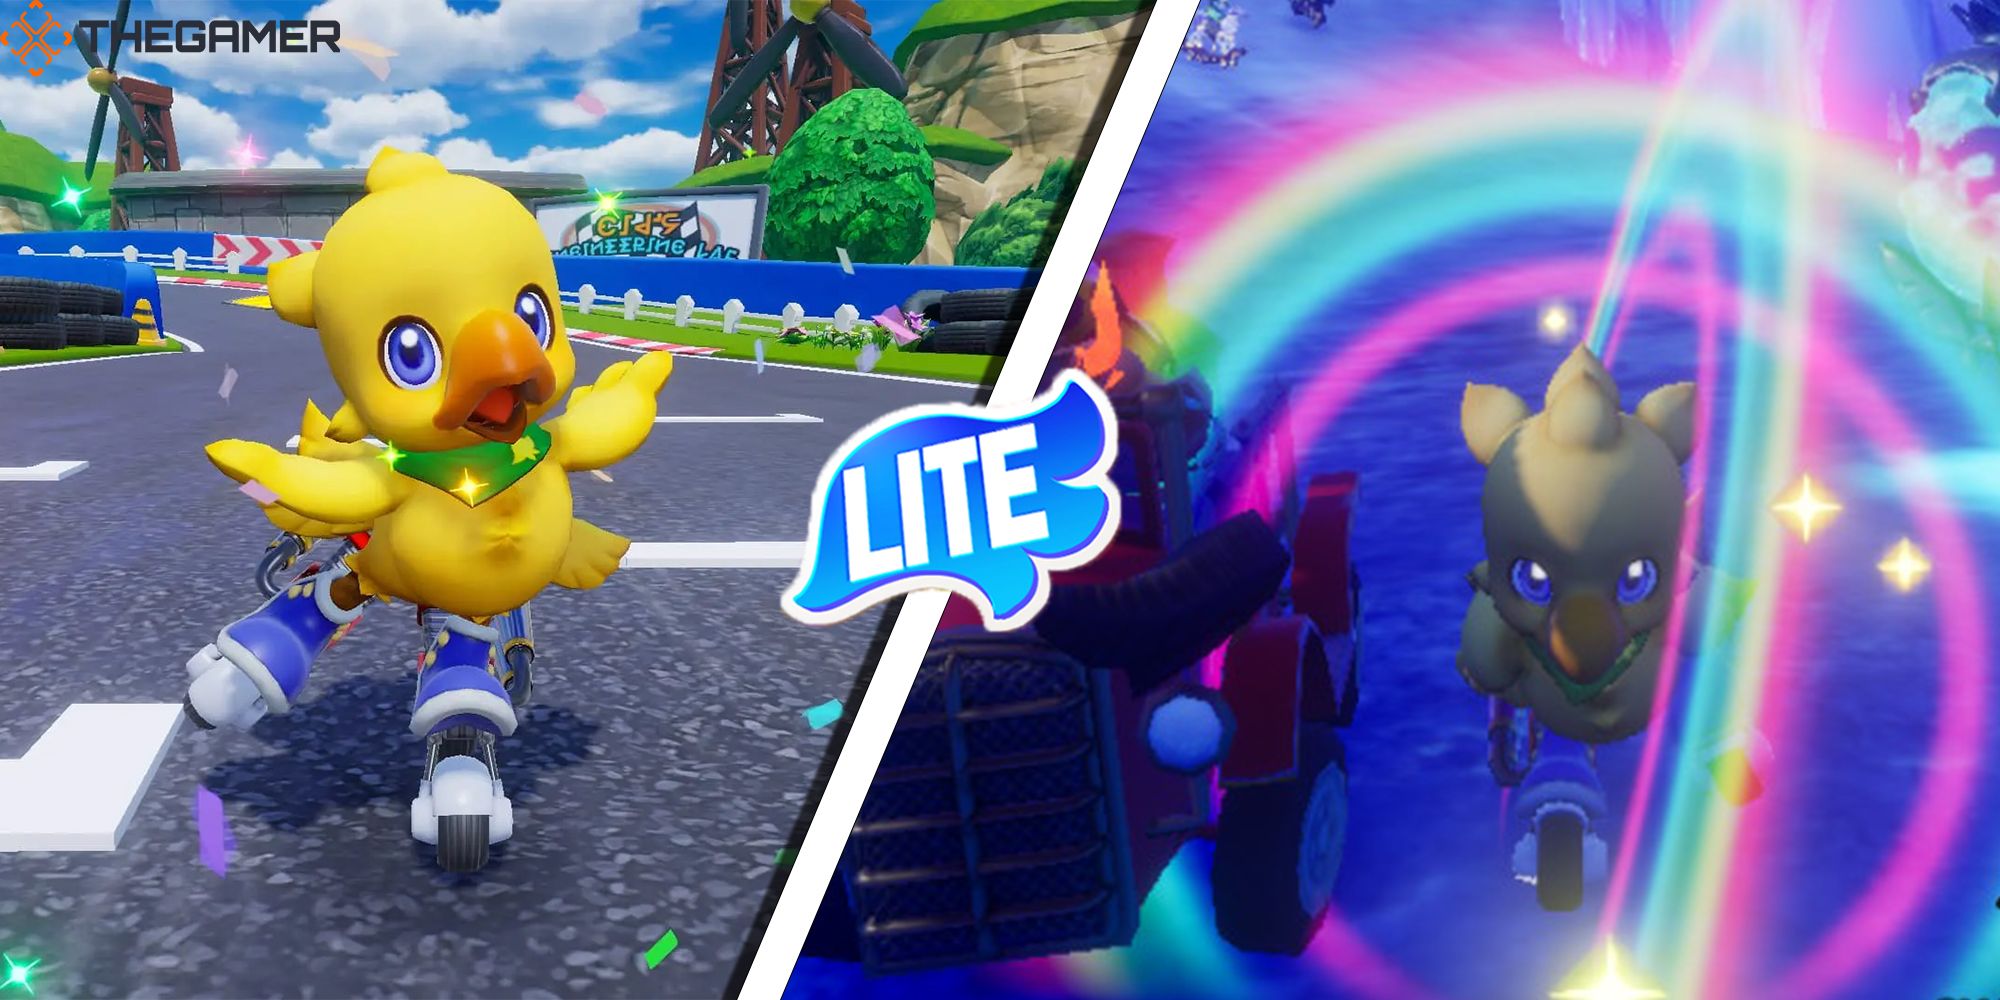 [Left Panel] Chocobo takes a victory lap around Cid's Test Track. [Right Panel] Chocobo and Ifrit race side by side at the Interdimensional Rift. Over the separation, there is a blue feather with the word, 'Lite,' on it. Chocobo GP. Custom Image: TG.